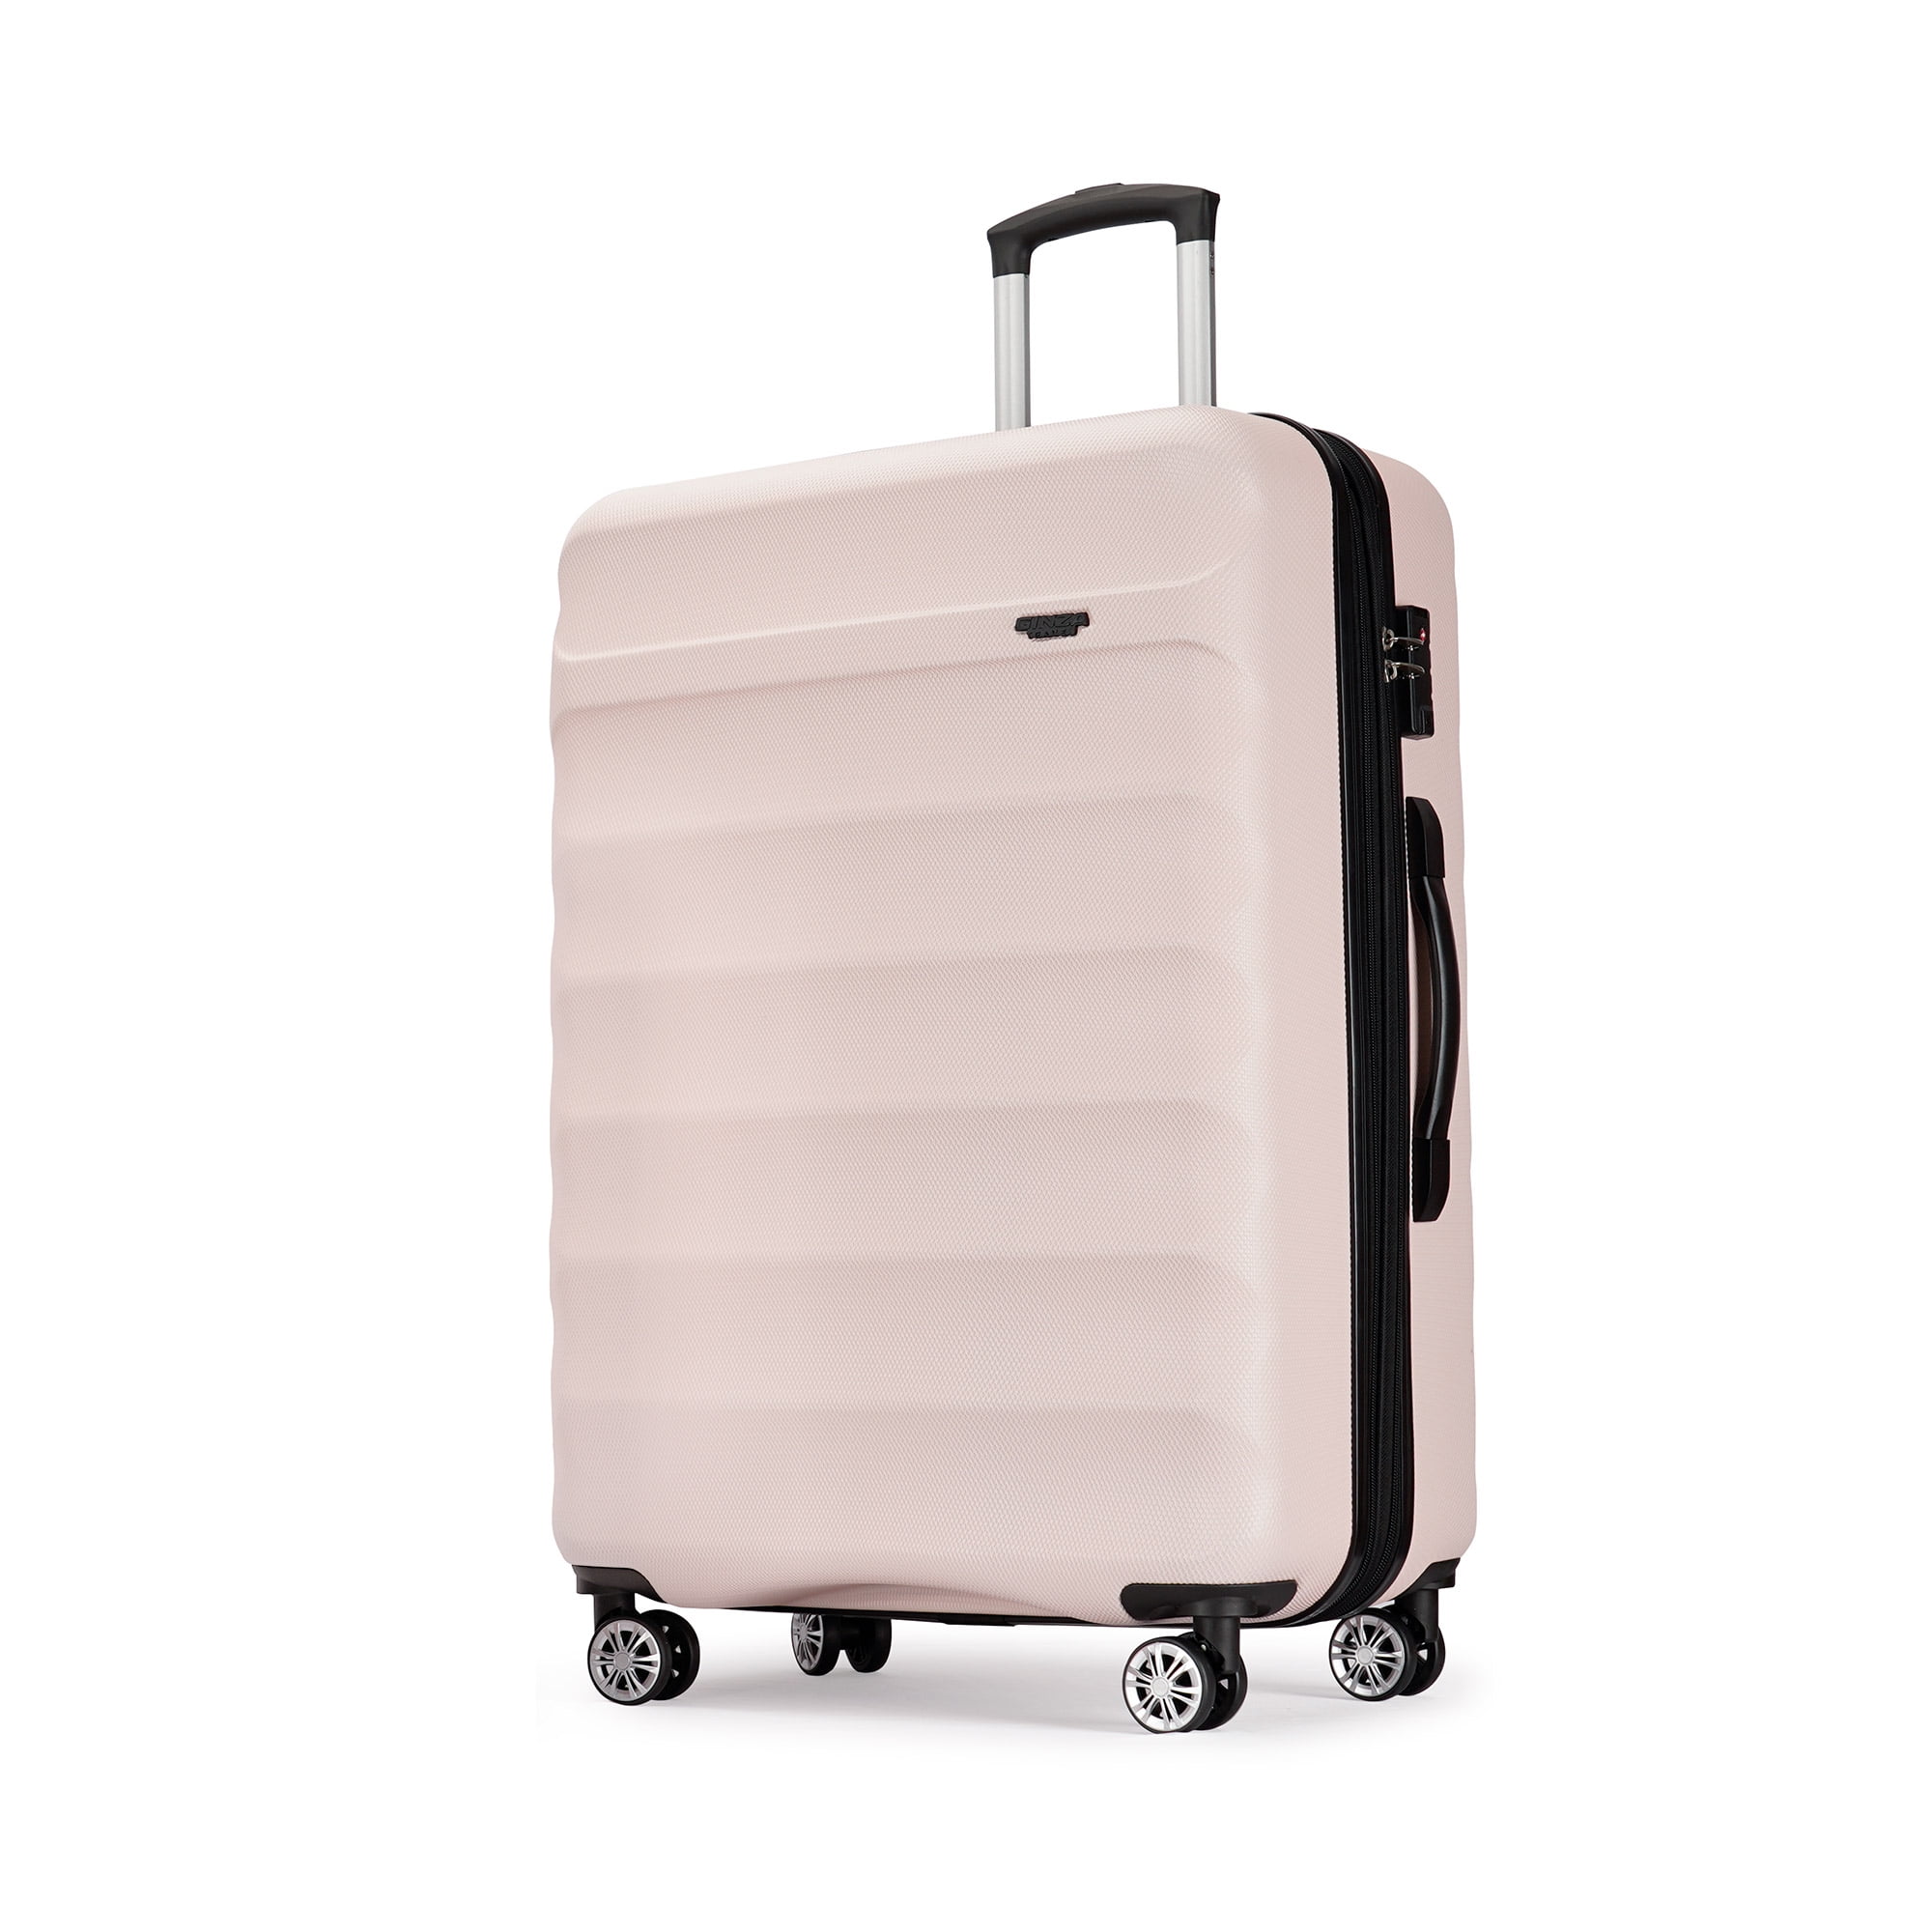 Ginza Travel 28 Checked Luggage,Hard Suitcase with Spinner Wheels, Travel  Luggage Set,Light Pink